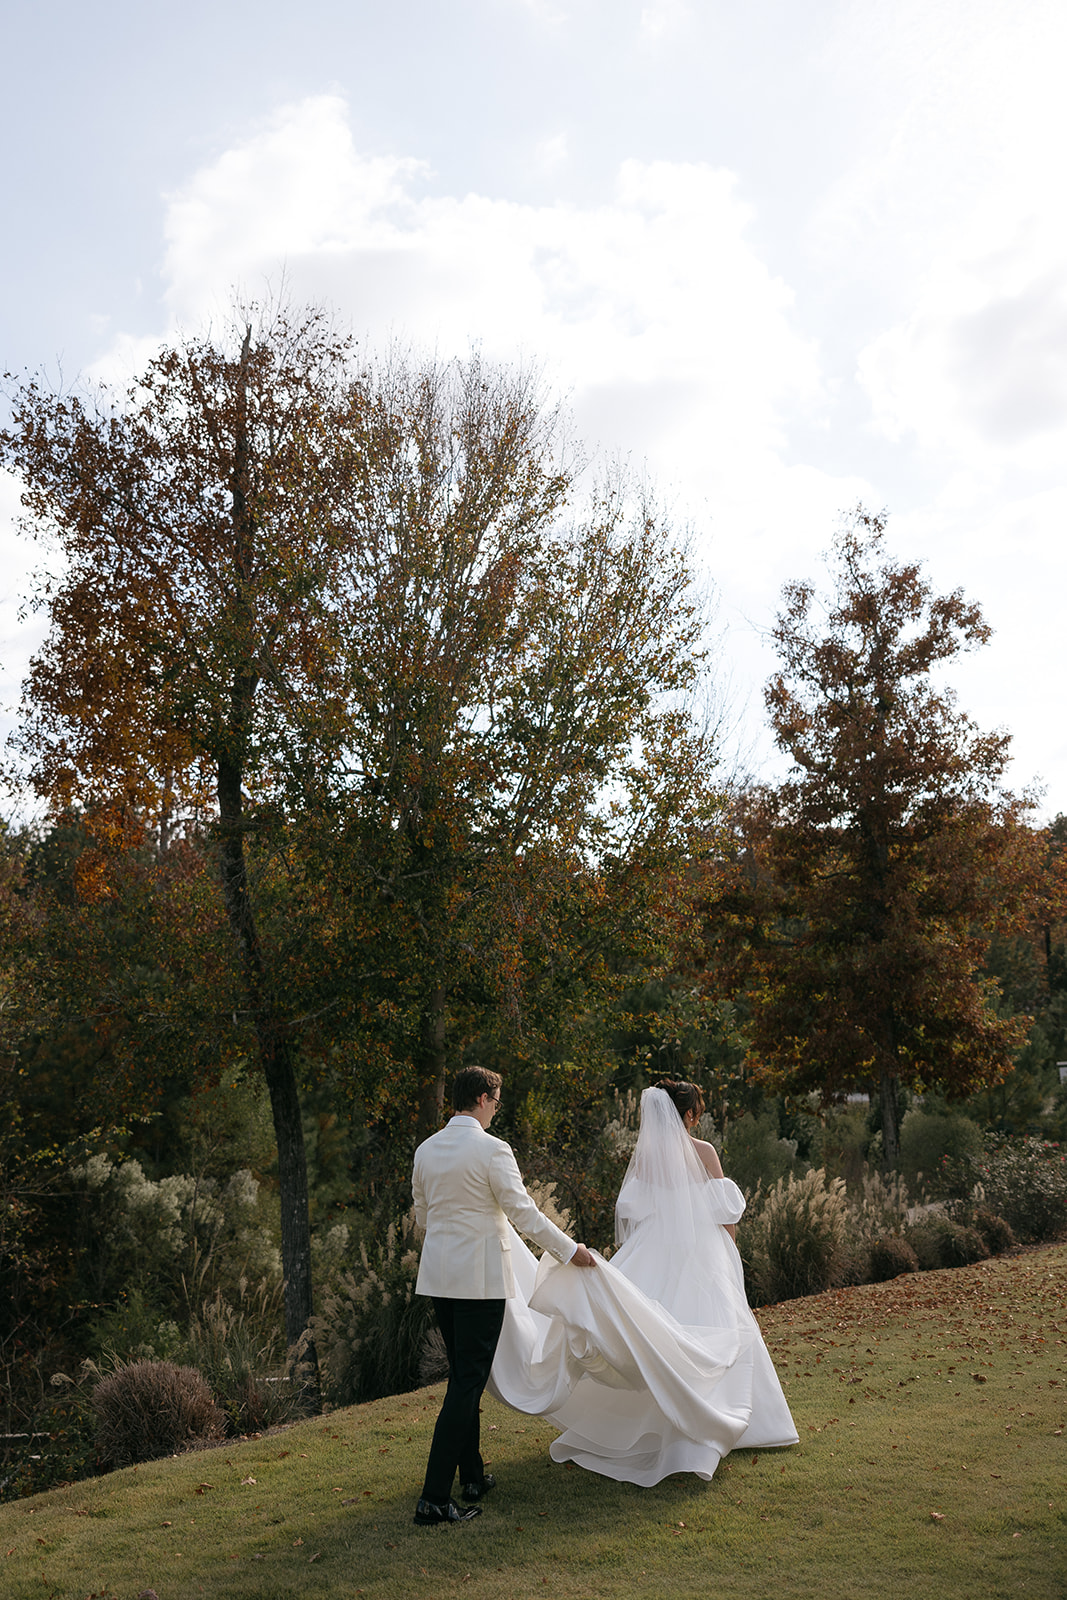 A couple walks during wedding day at The Barn at Smith Lake in Alabama